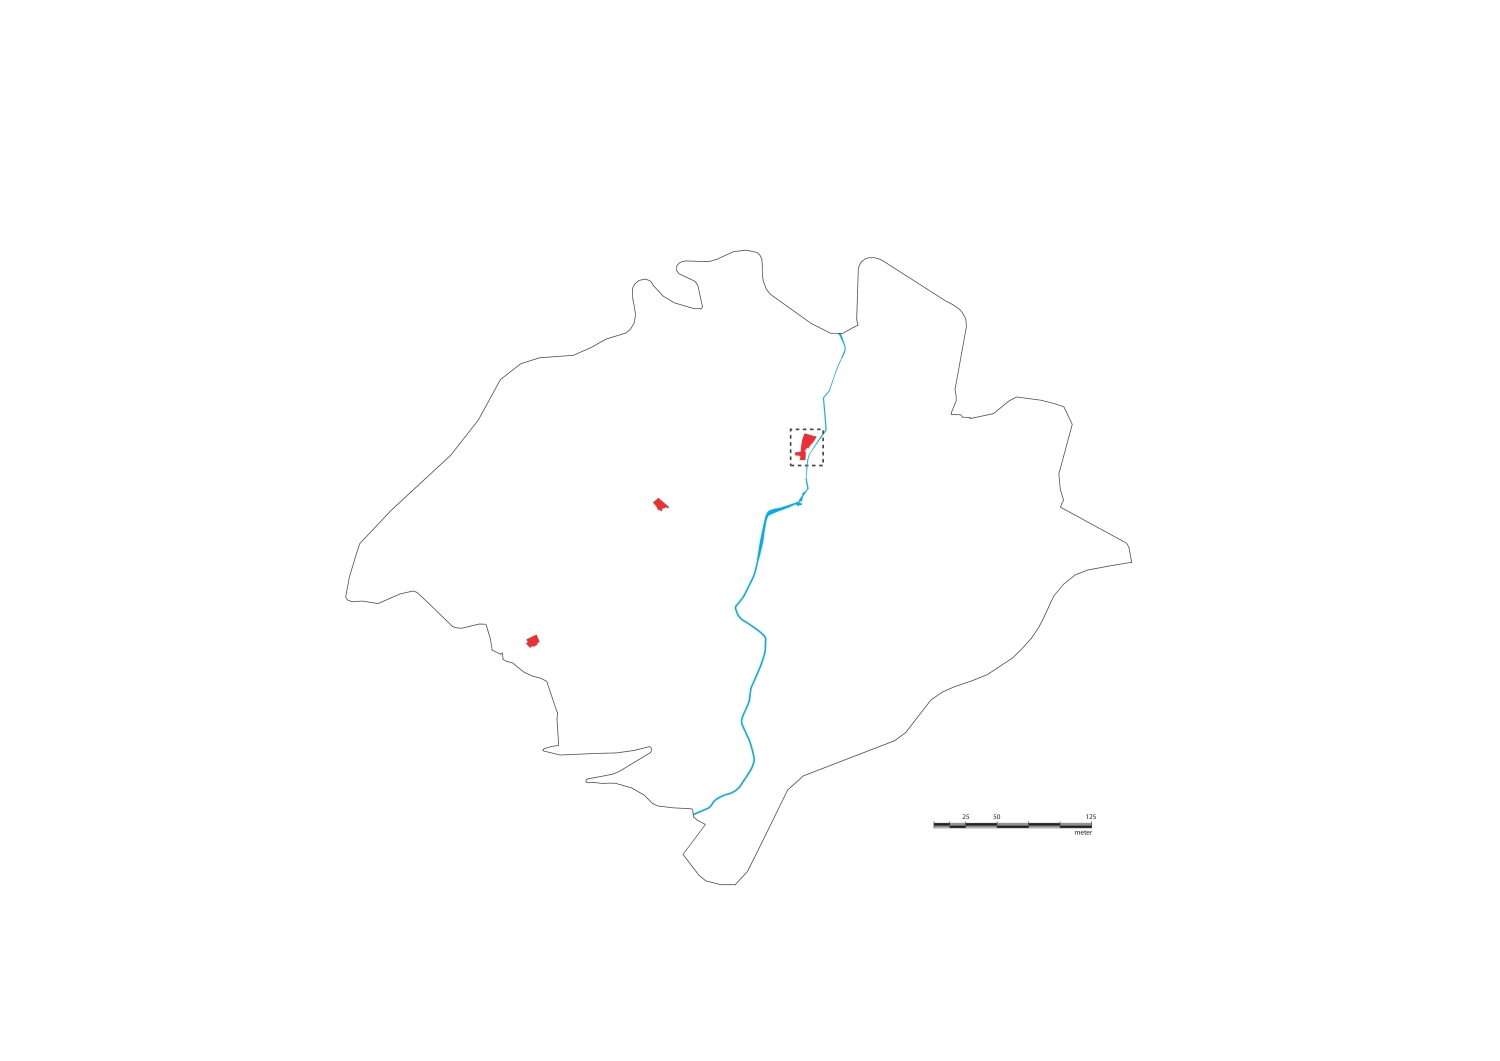 Reduced map of the medina of Fes, showing the location of the Chouara Tannery (in dotted box). The black lines show the medina walls, the blue line shows the river, and the red dots are locations of tanneries in Fes